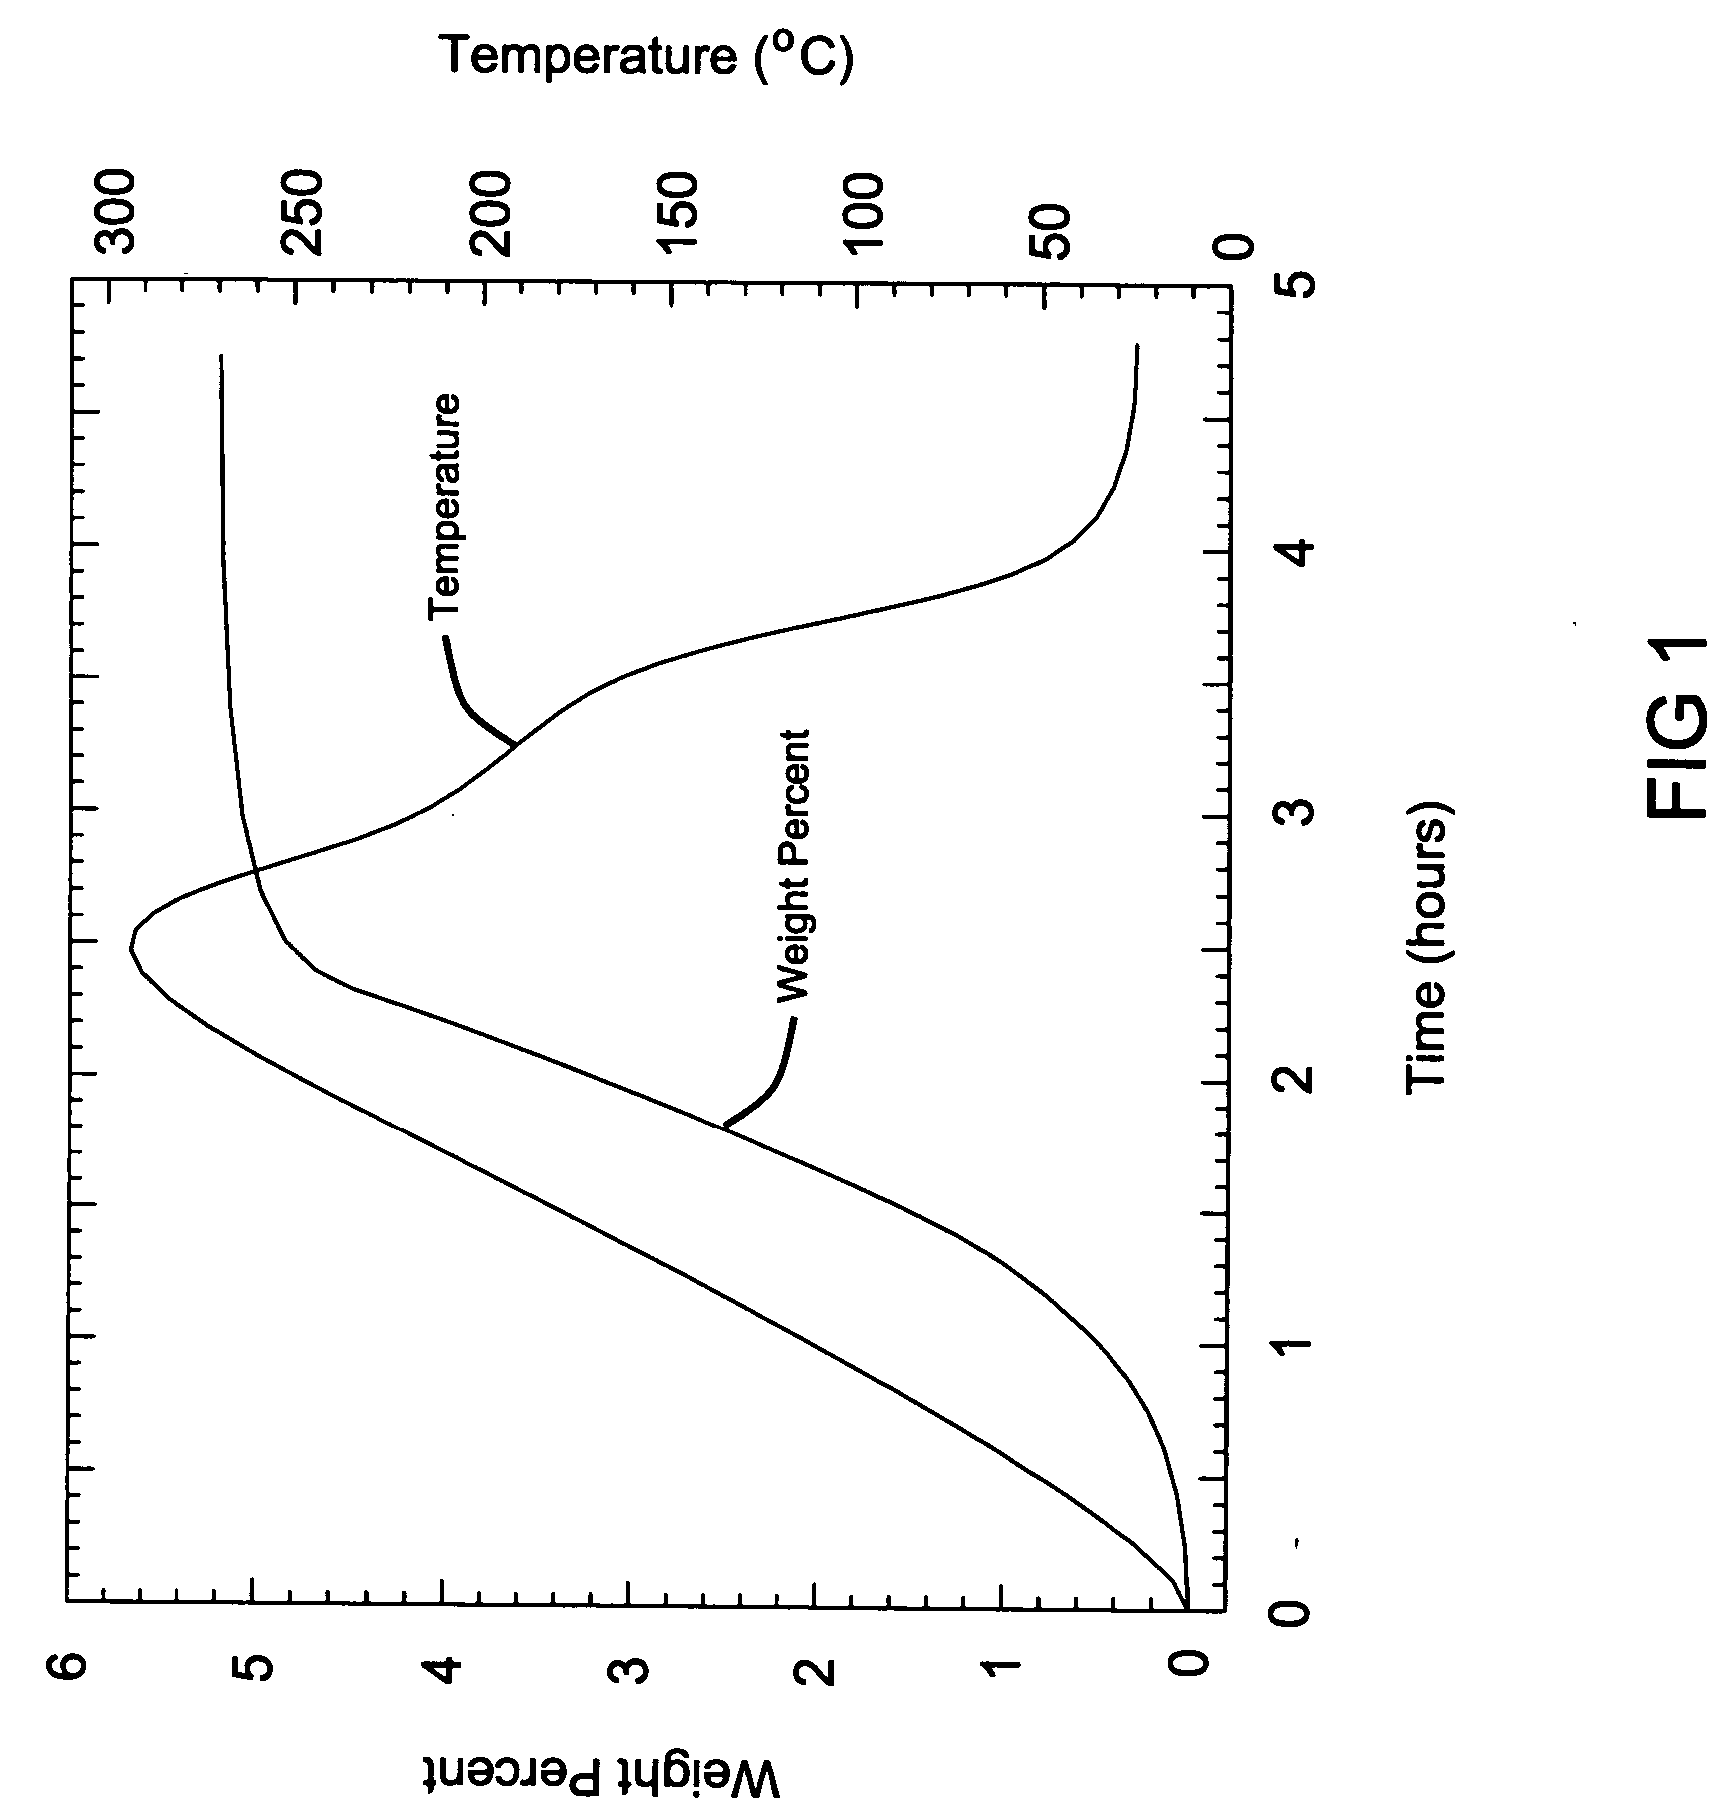 Hydrogen storage system materials and methods including hydrides and hydroxides